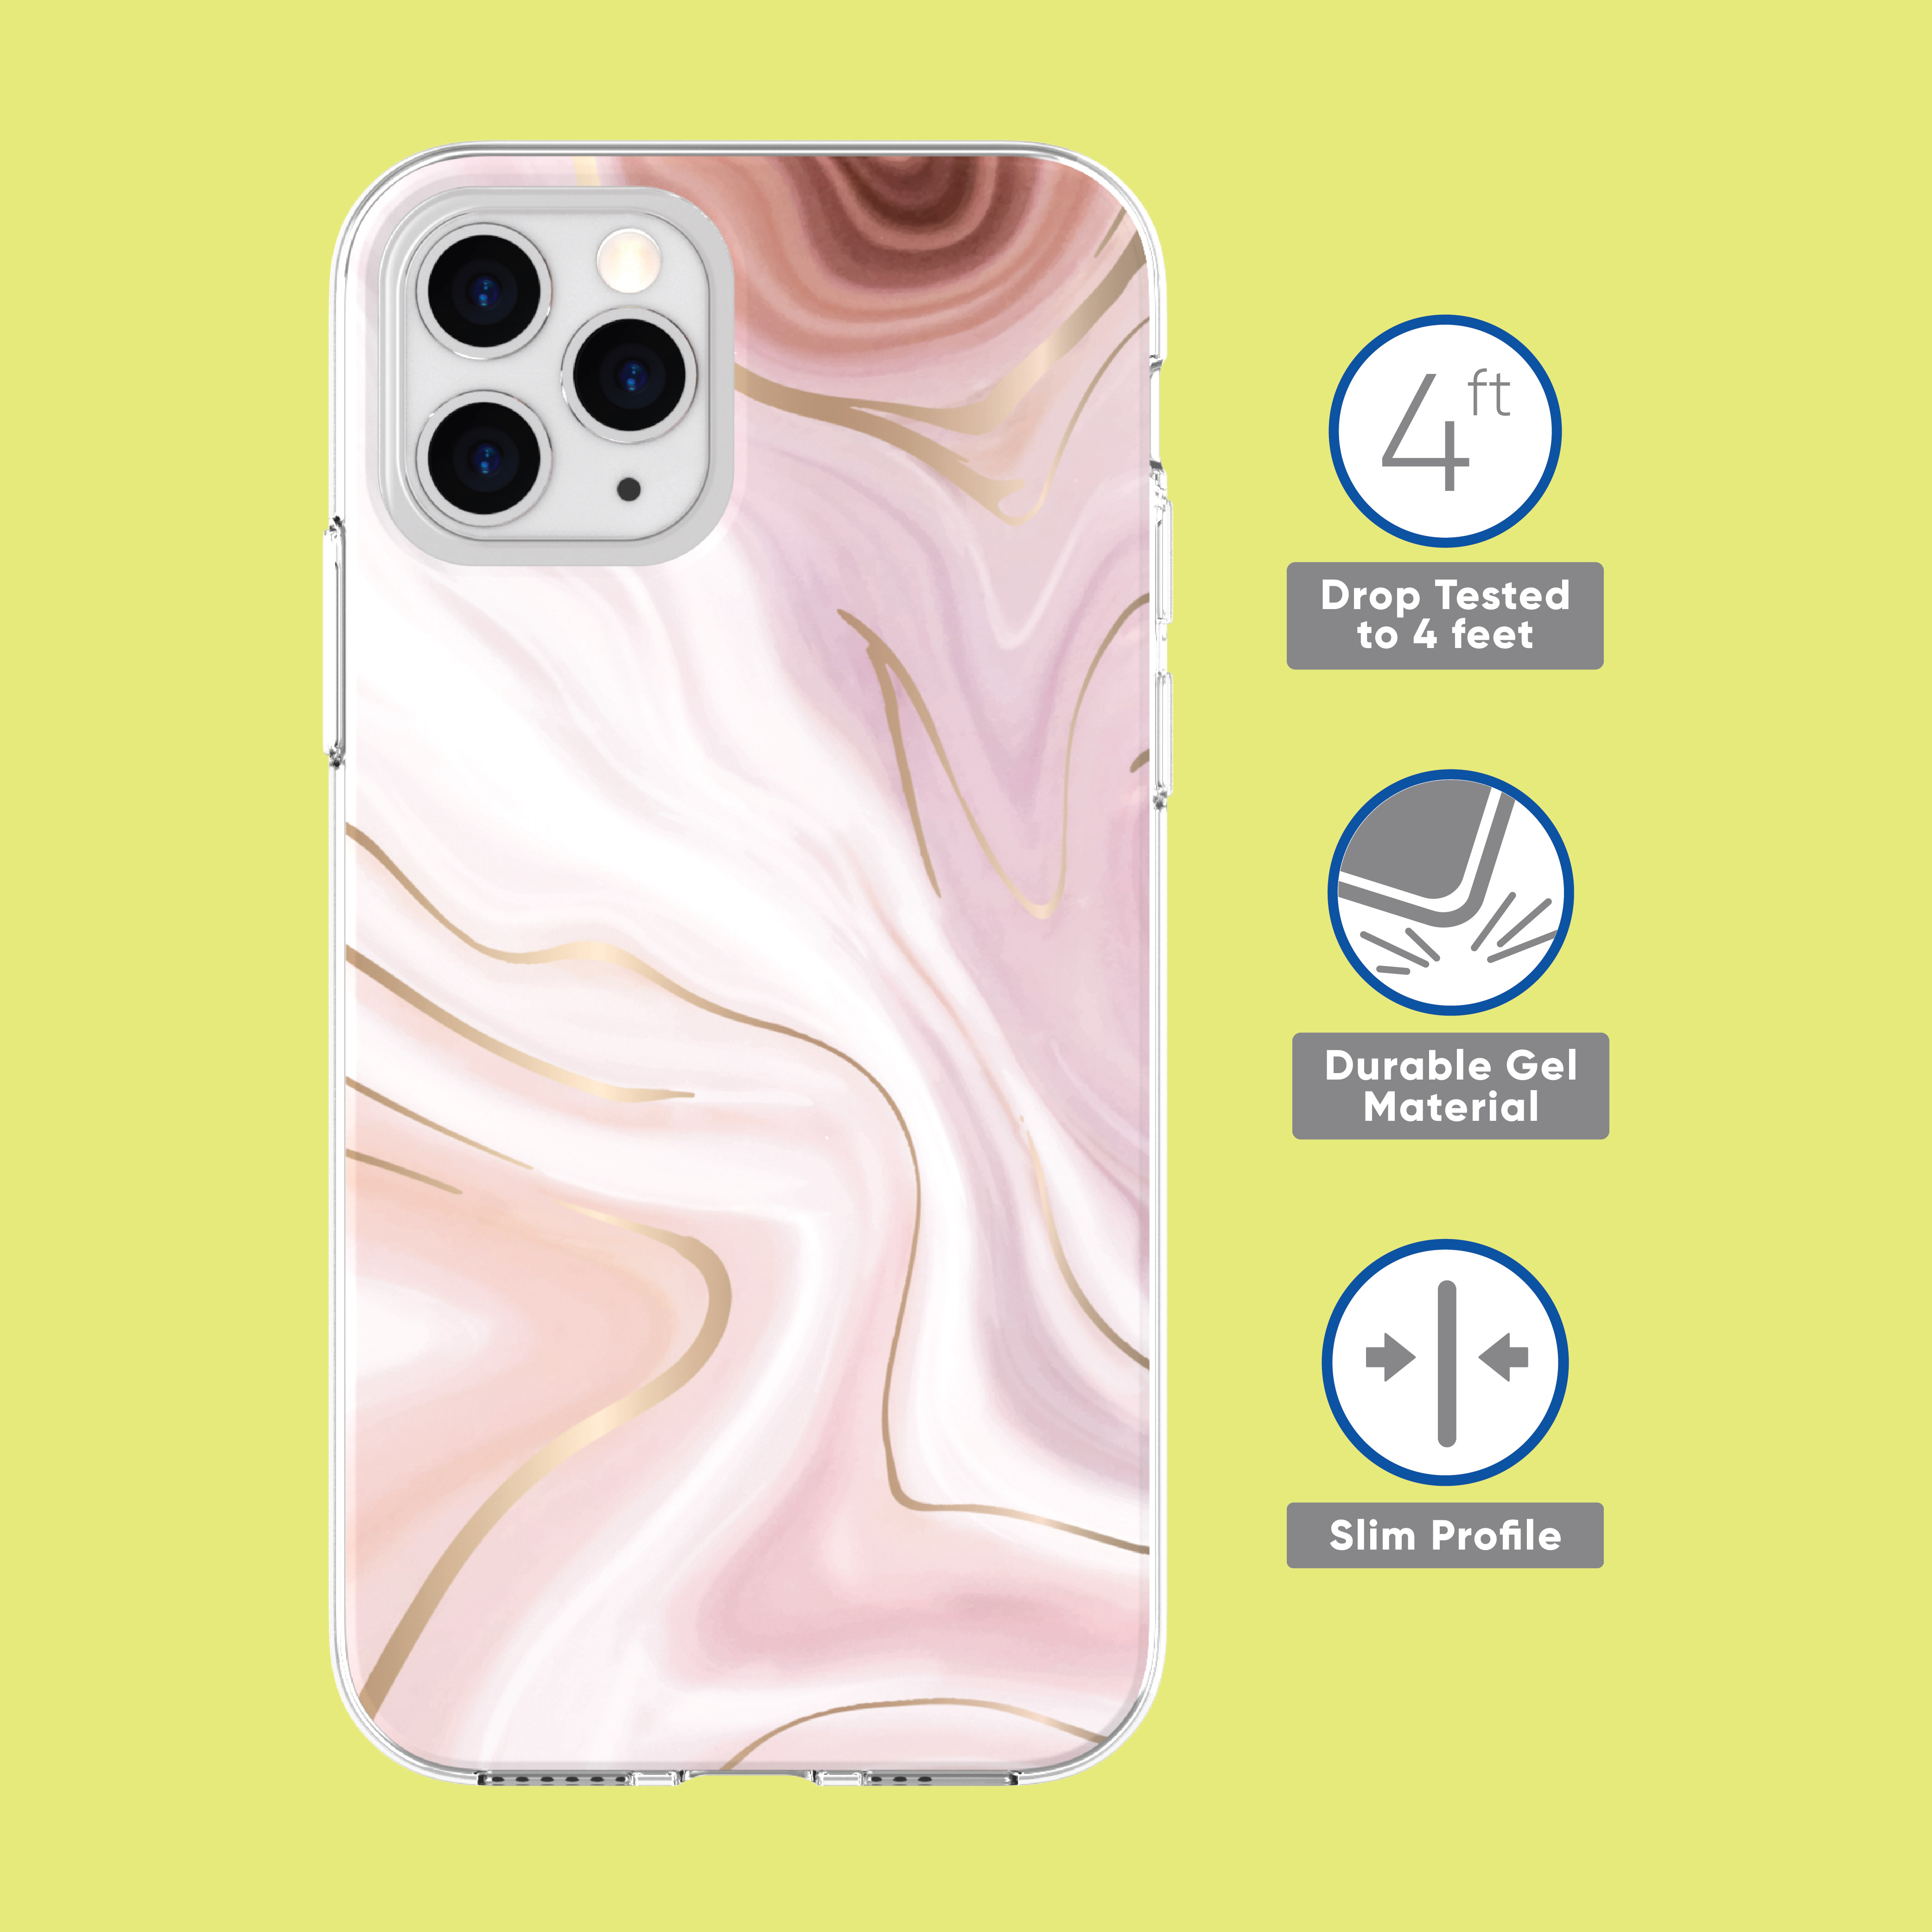 onn. Fashion Phone Case For iPhone 11, iPhone XR - image 2 of 7